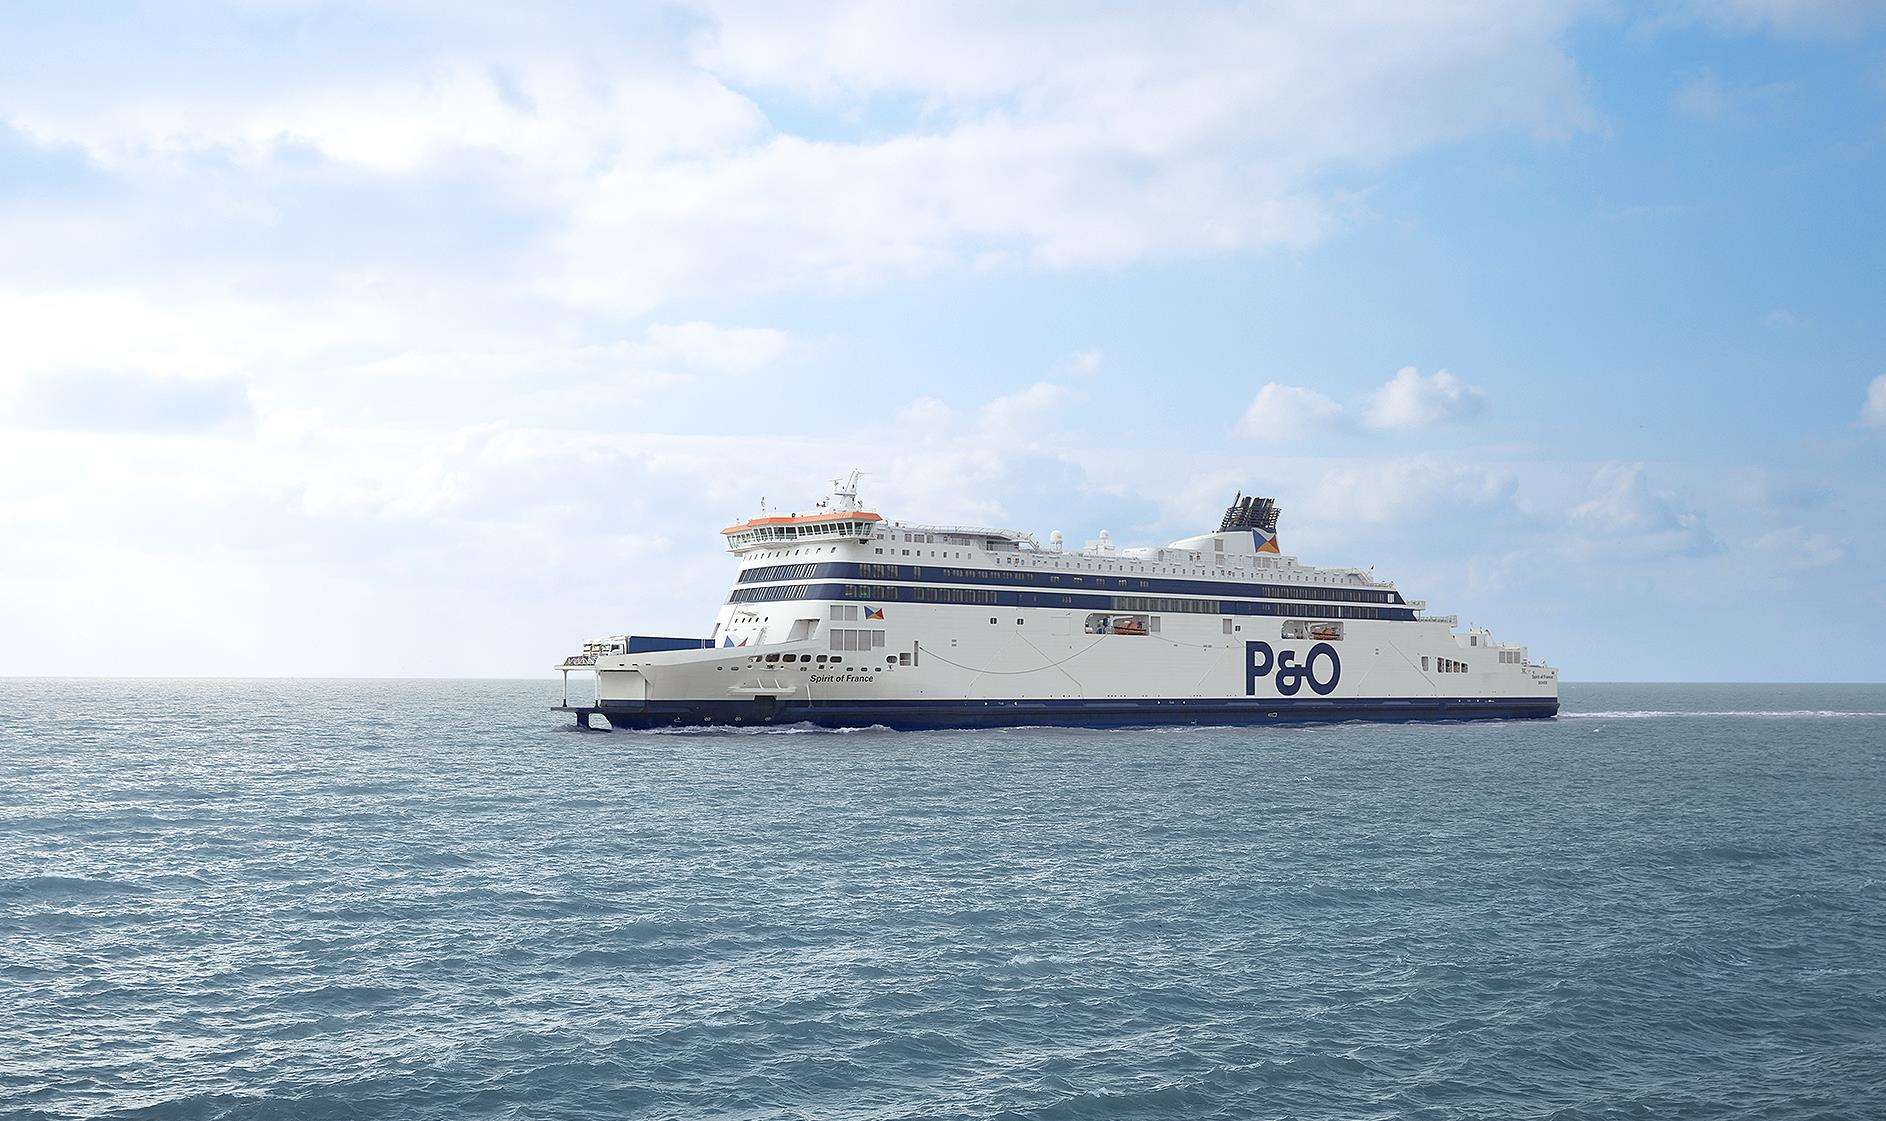 More than 50 jobs are on the line at P&O Ferries